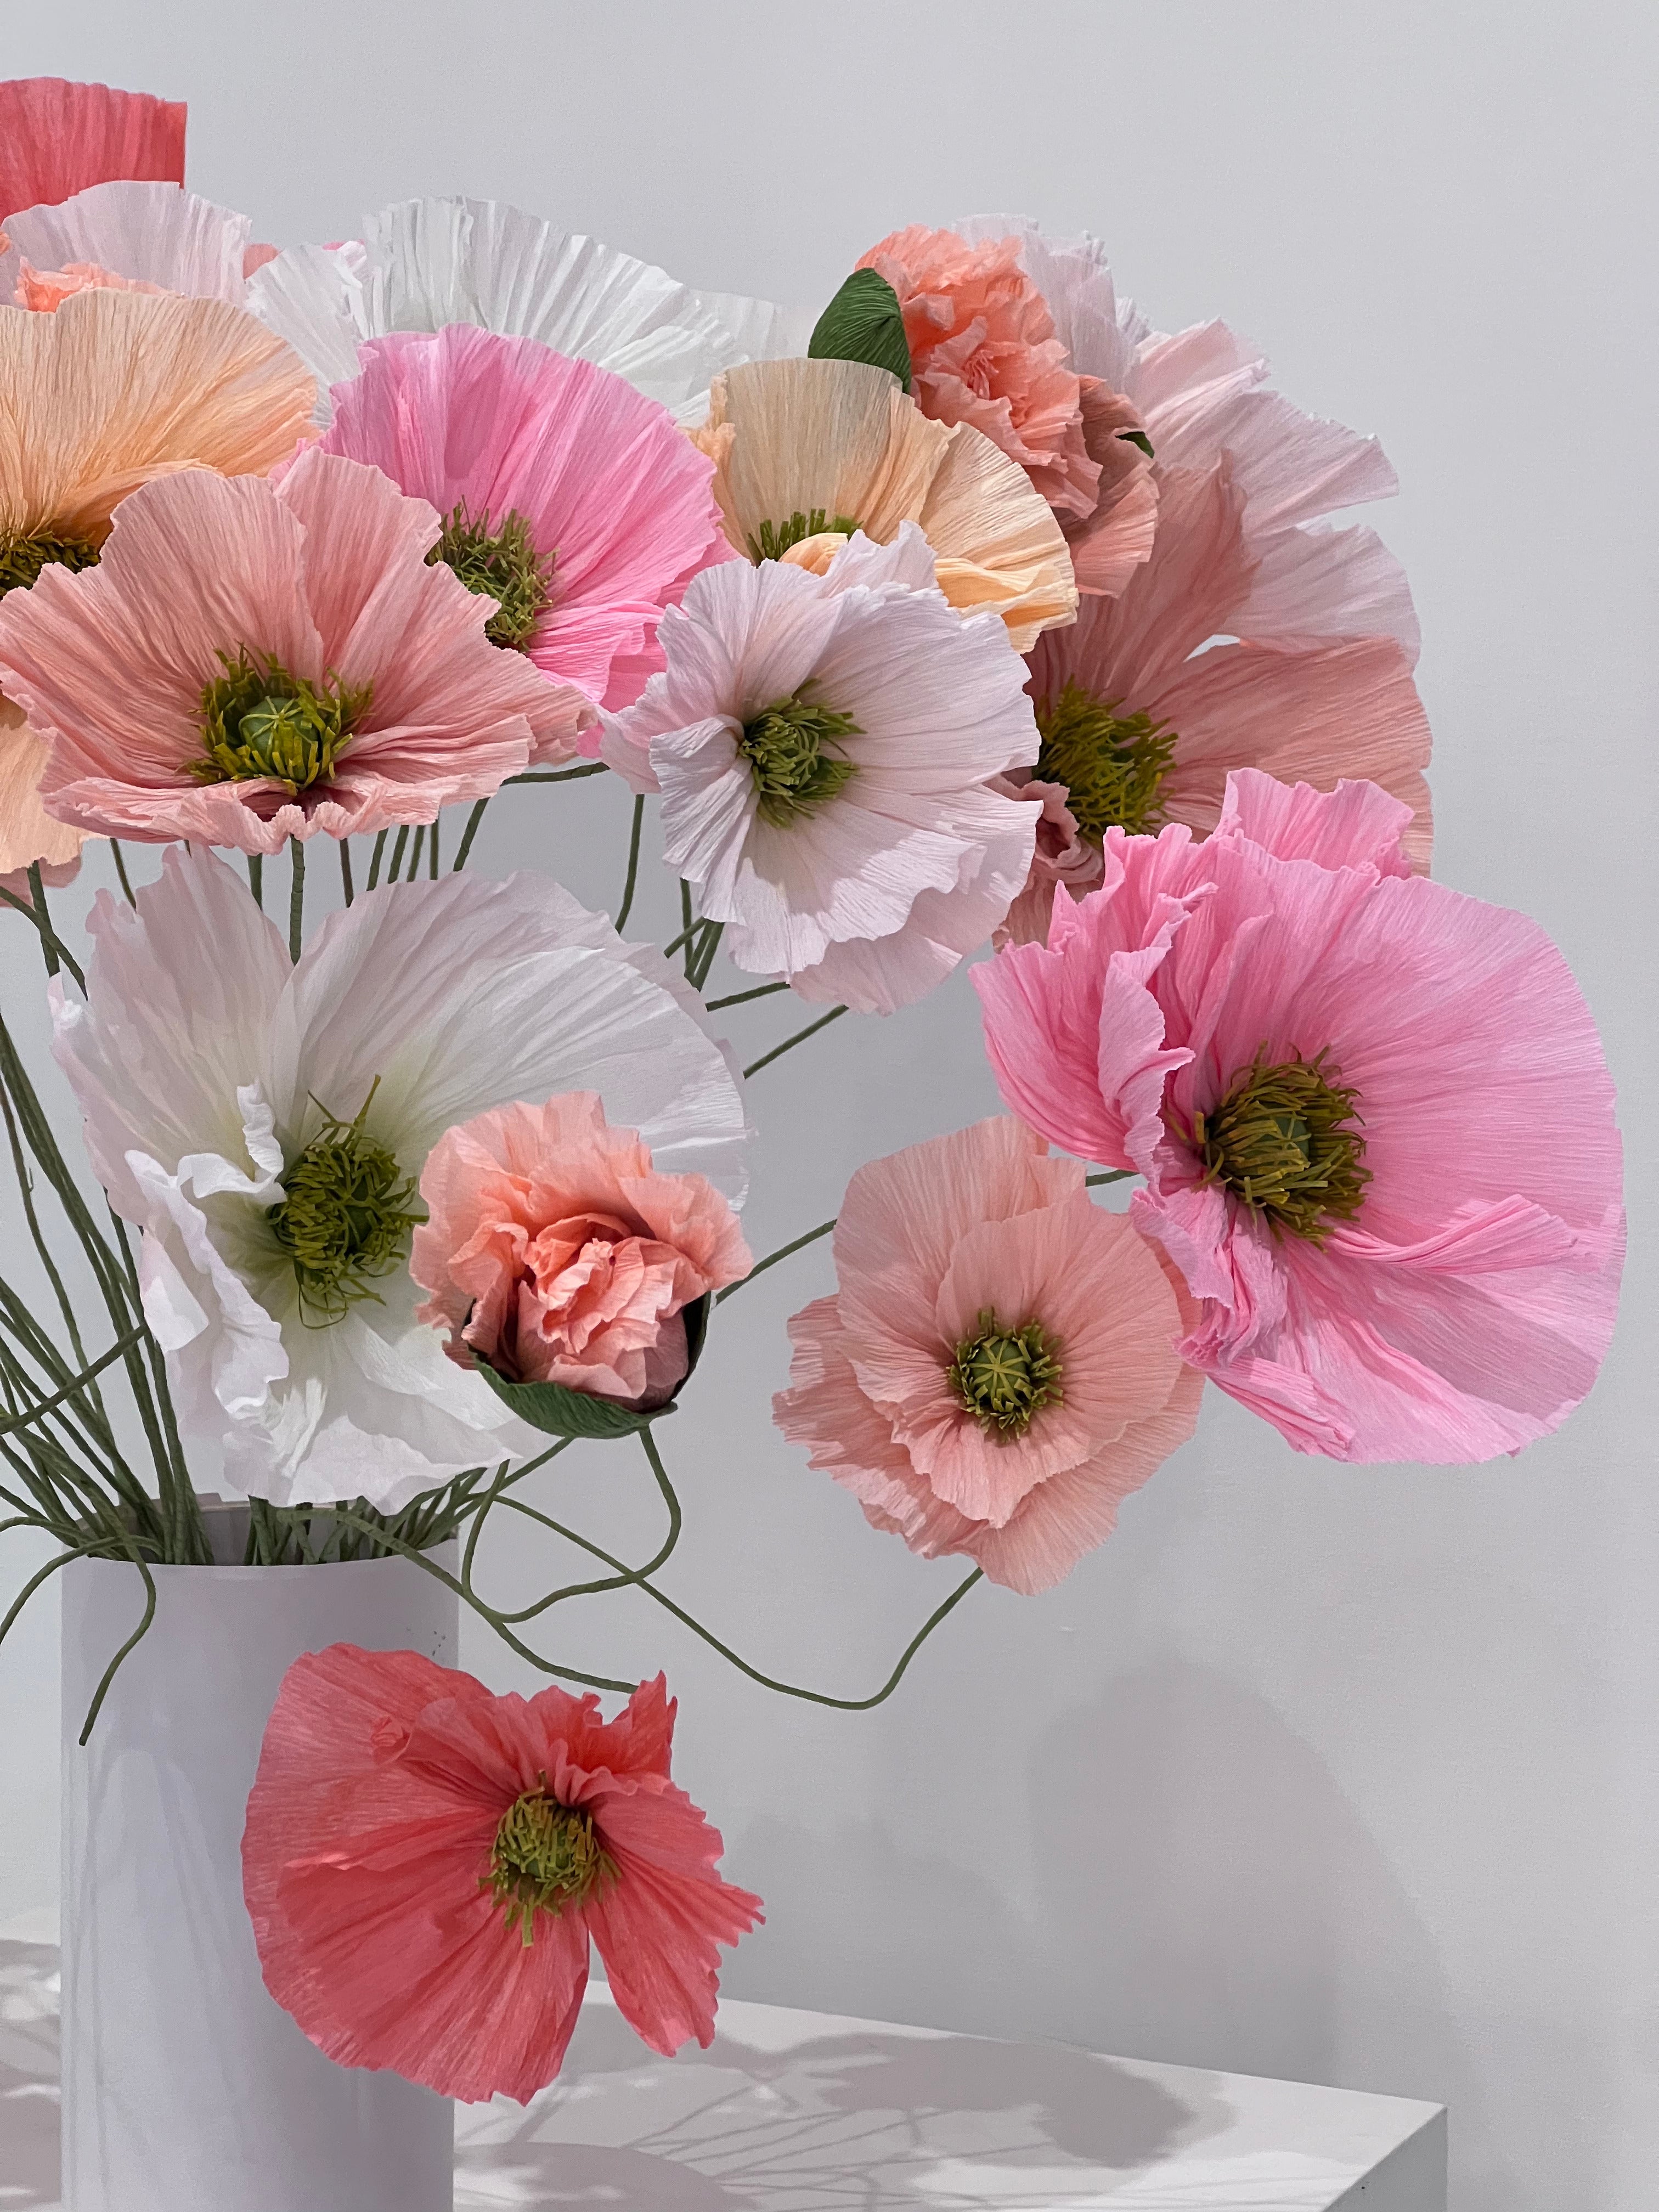 A group of paper poppies with delicate stems and petals, creating a whimsical and enchanting atmosphere.